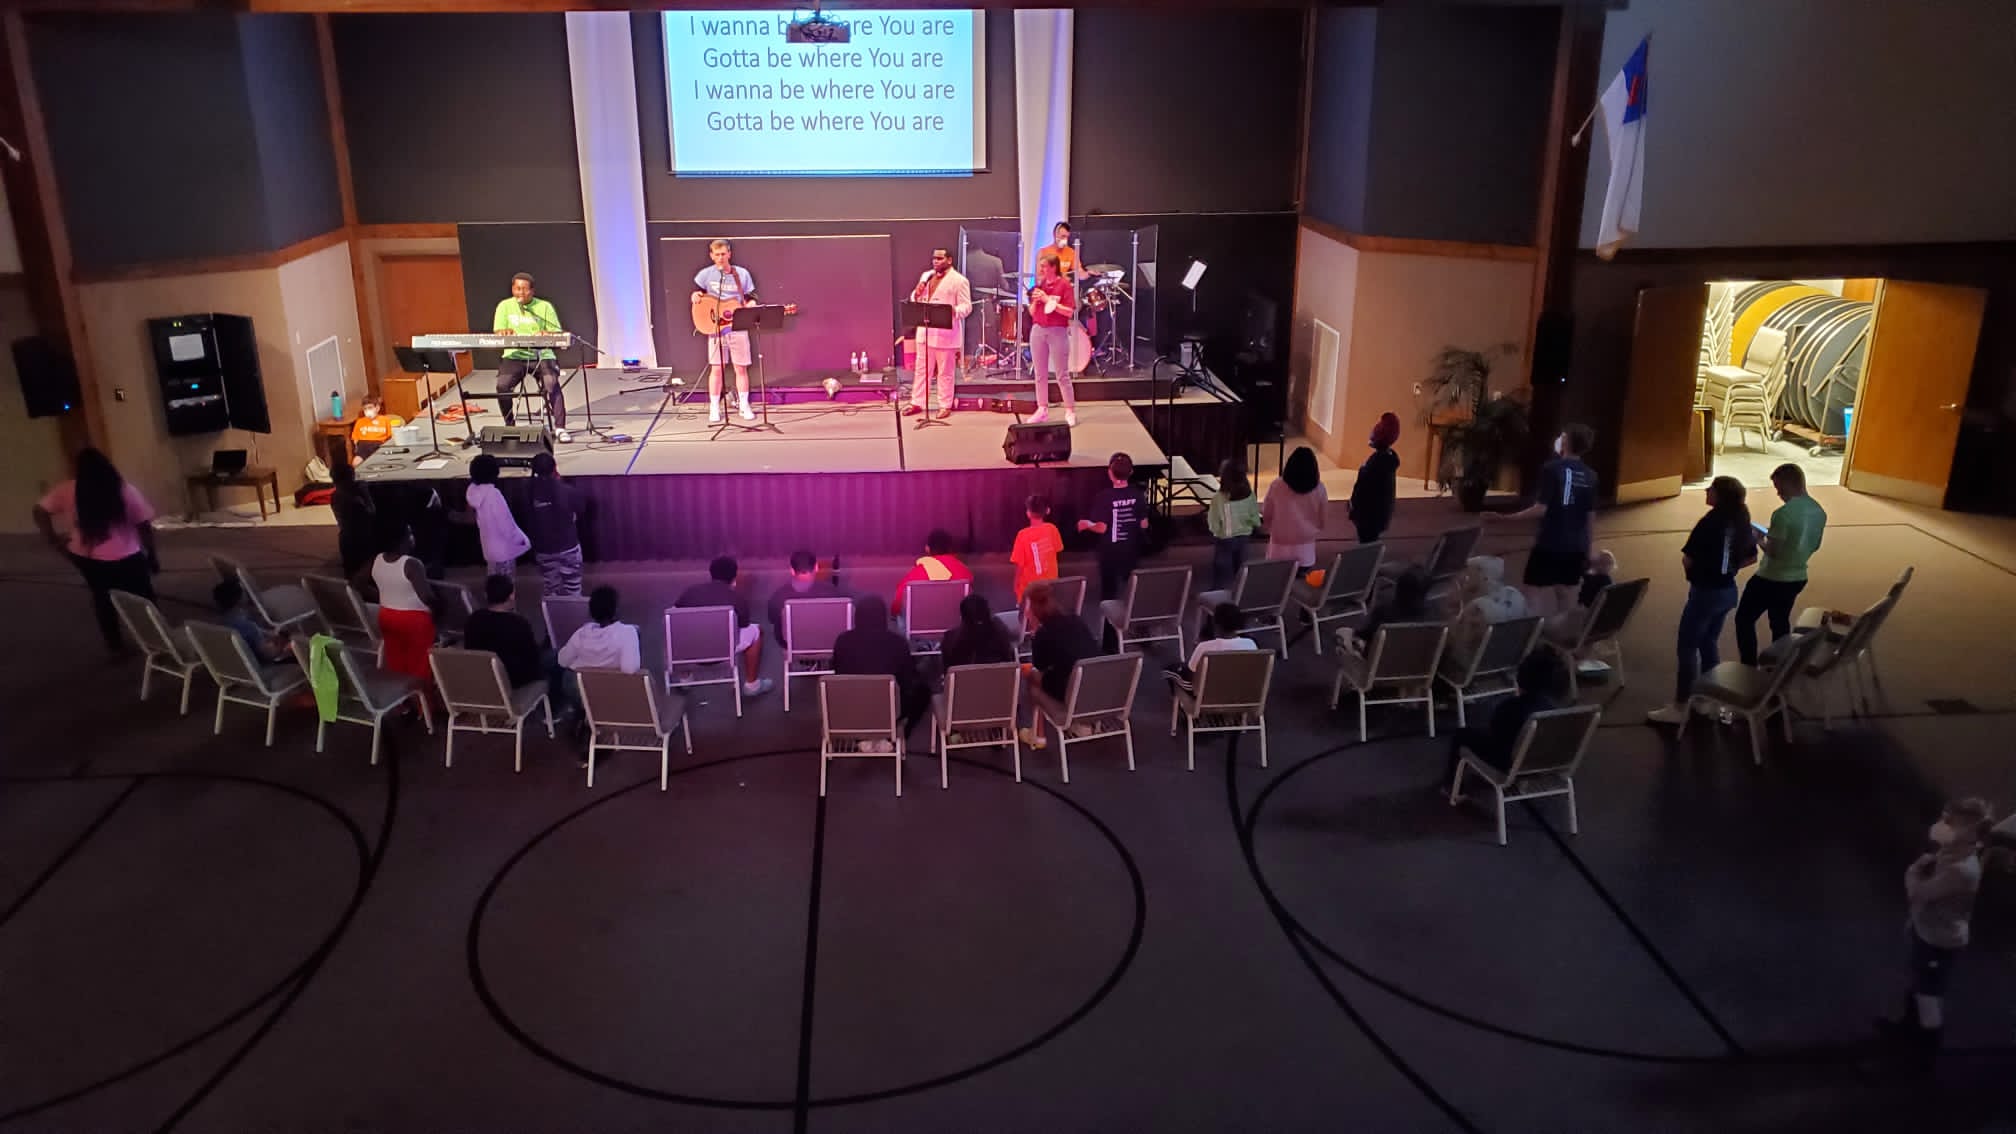 REALITY wide shot during worship